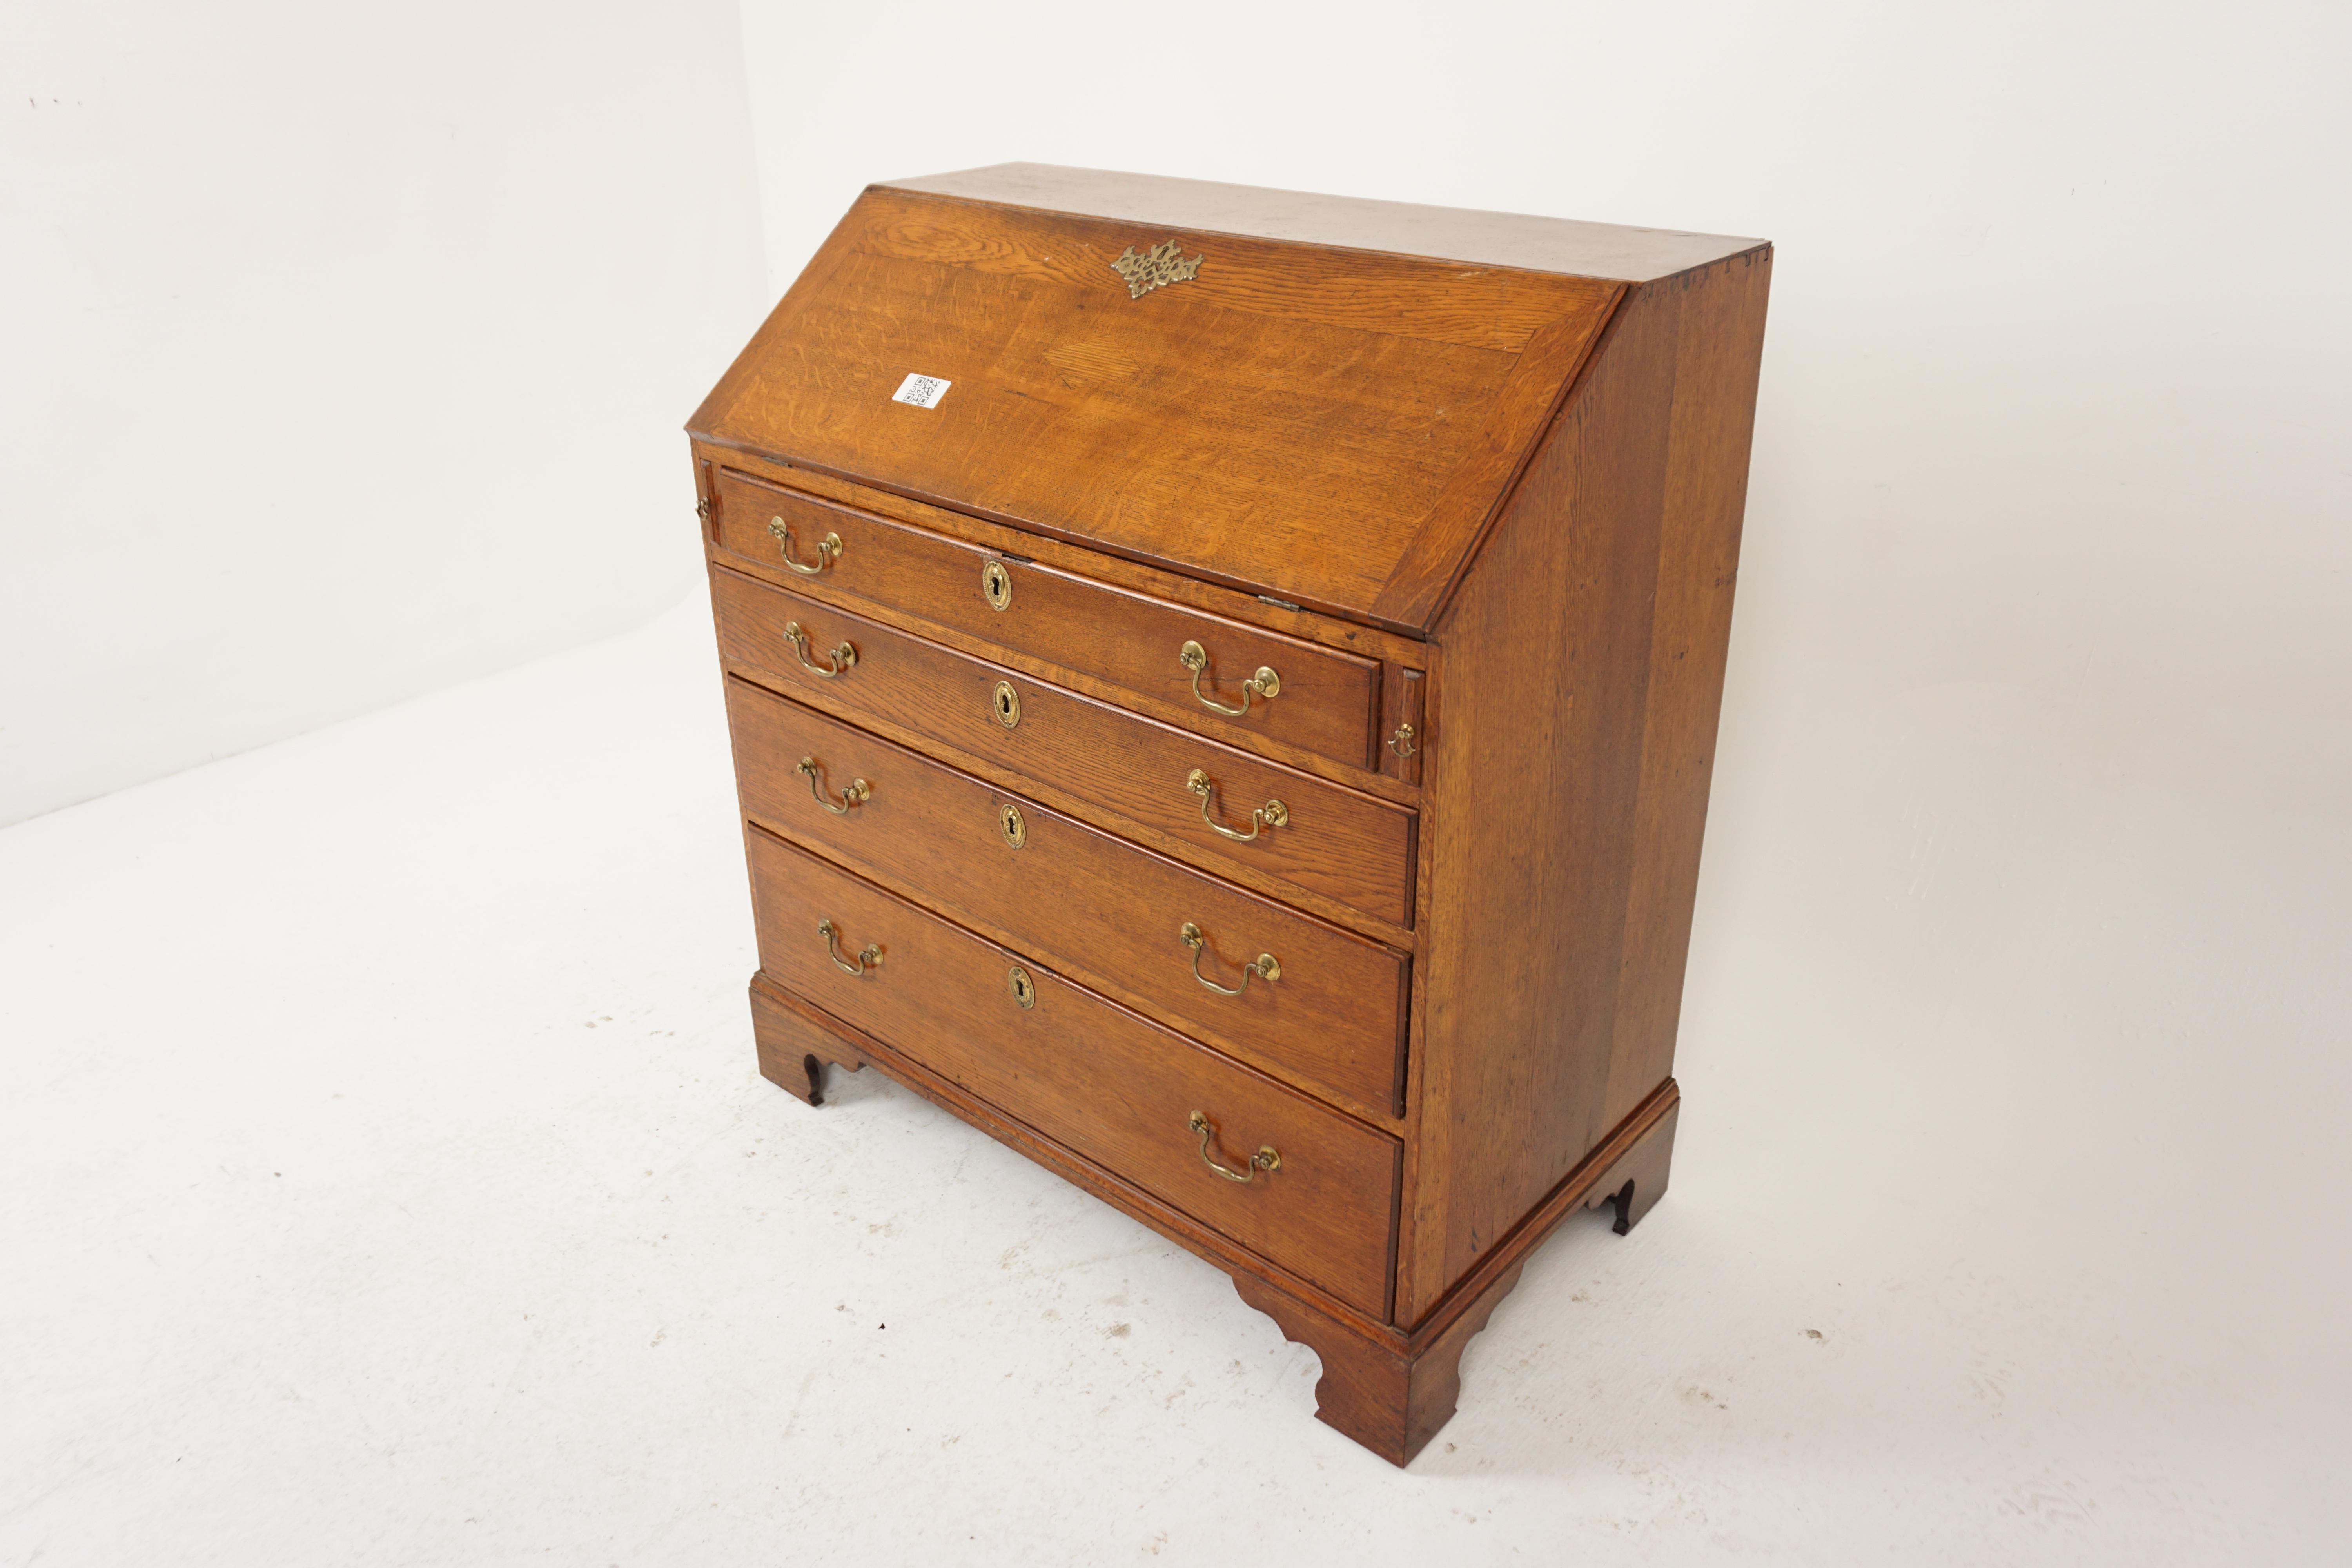 Antique Georgian Tiger Oak Bureau, Desk, Writing Table, Secretary, Scotland 1810, H975

Scotland 1810
Solid Oak
Original finish
Rectangular solid oak top
Locking fall front writing surface
The interior is fitted with numerous pigeon holes, 4 drawers